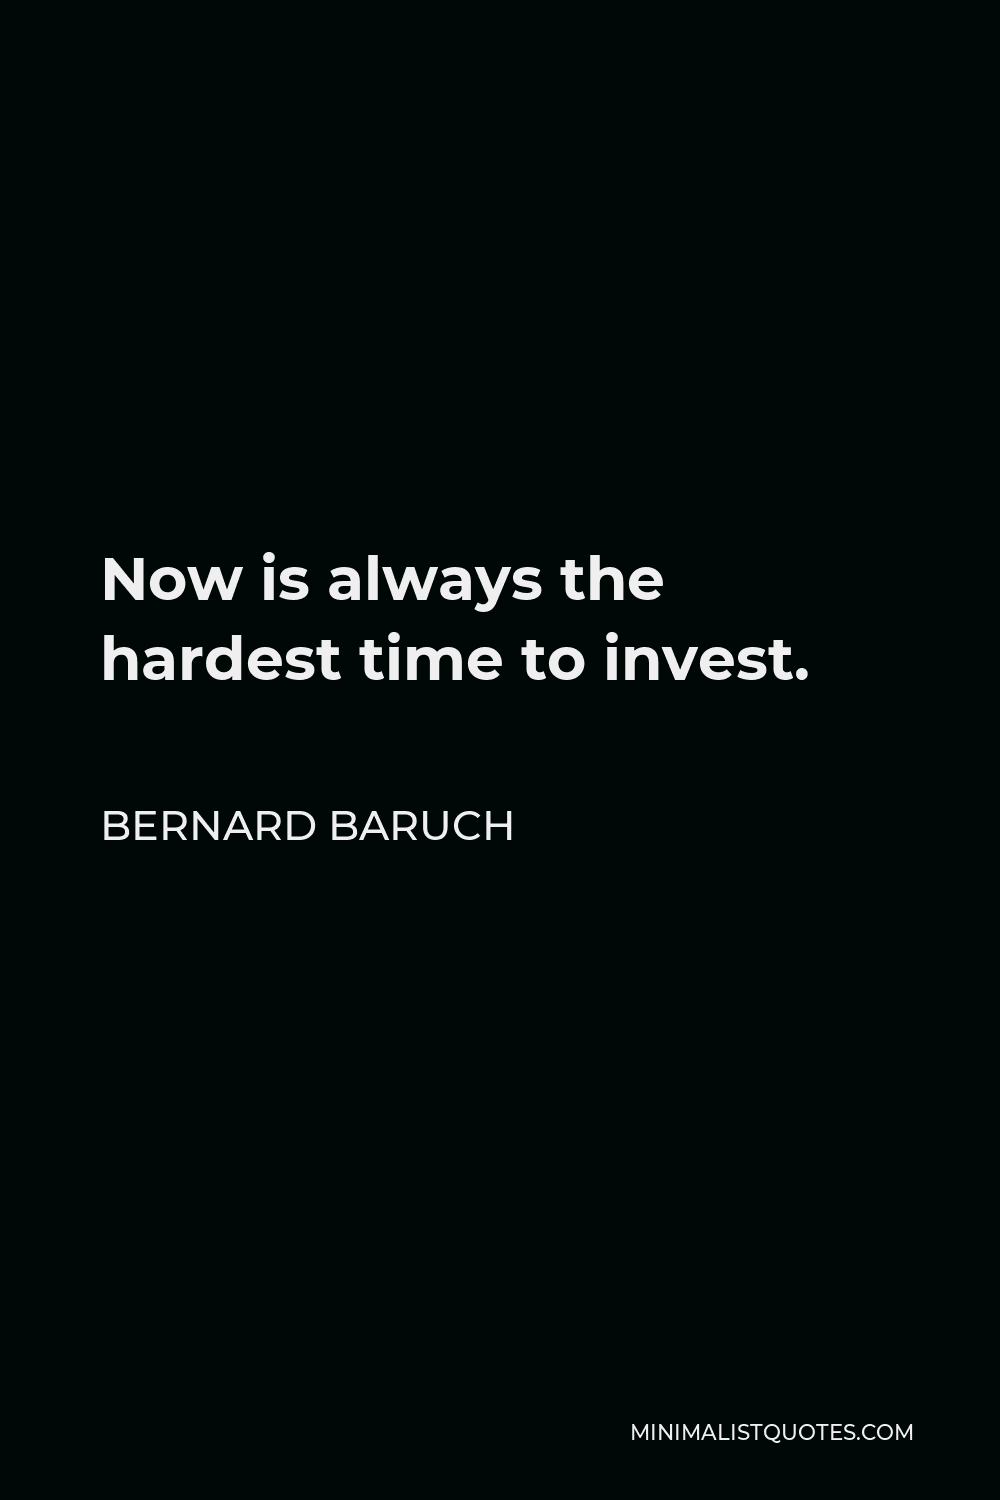 Bernard Baruch Quote - Now is always the hardest time to invest.